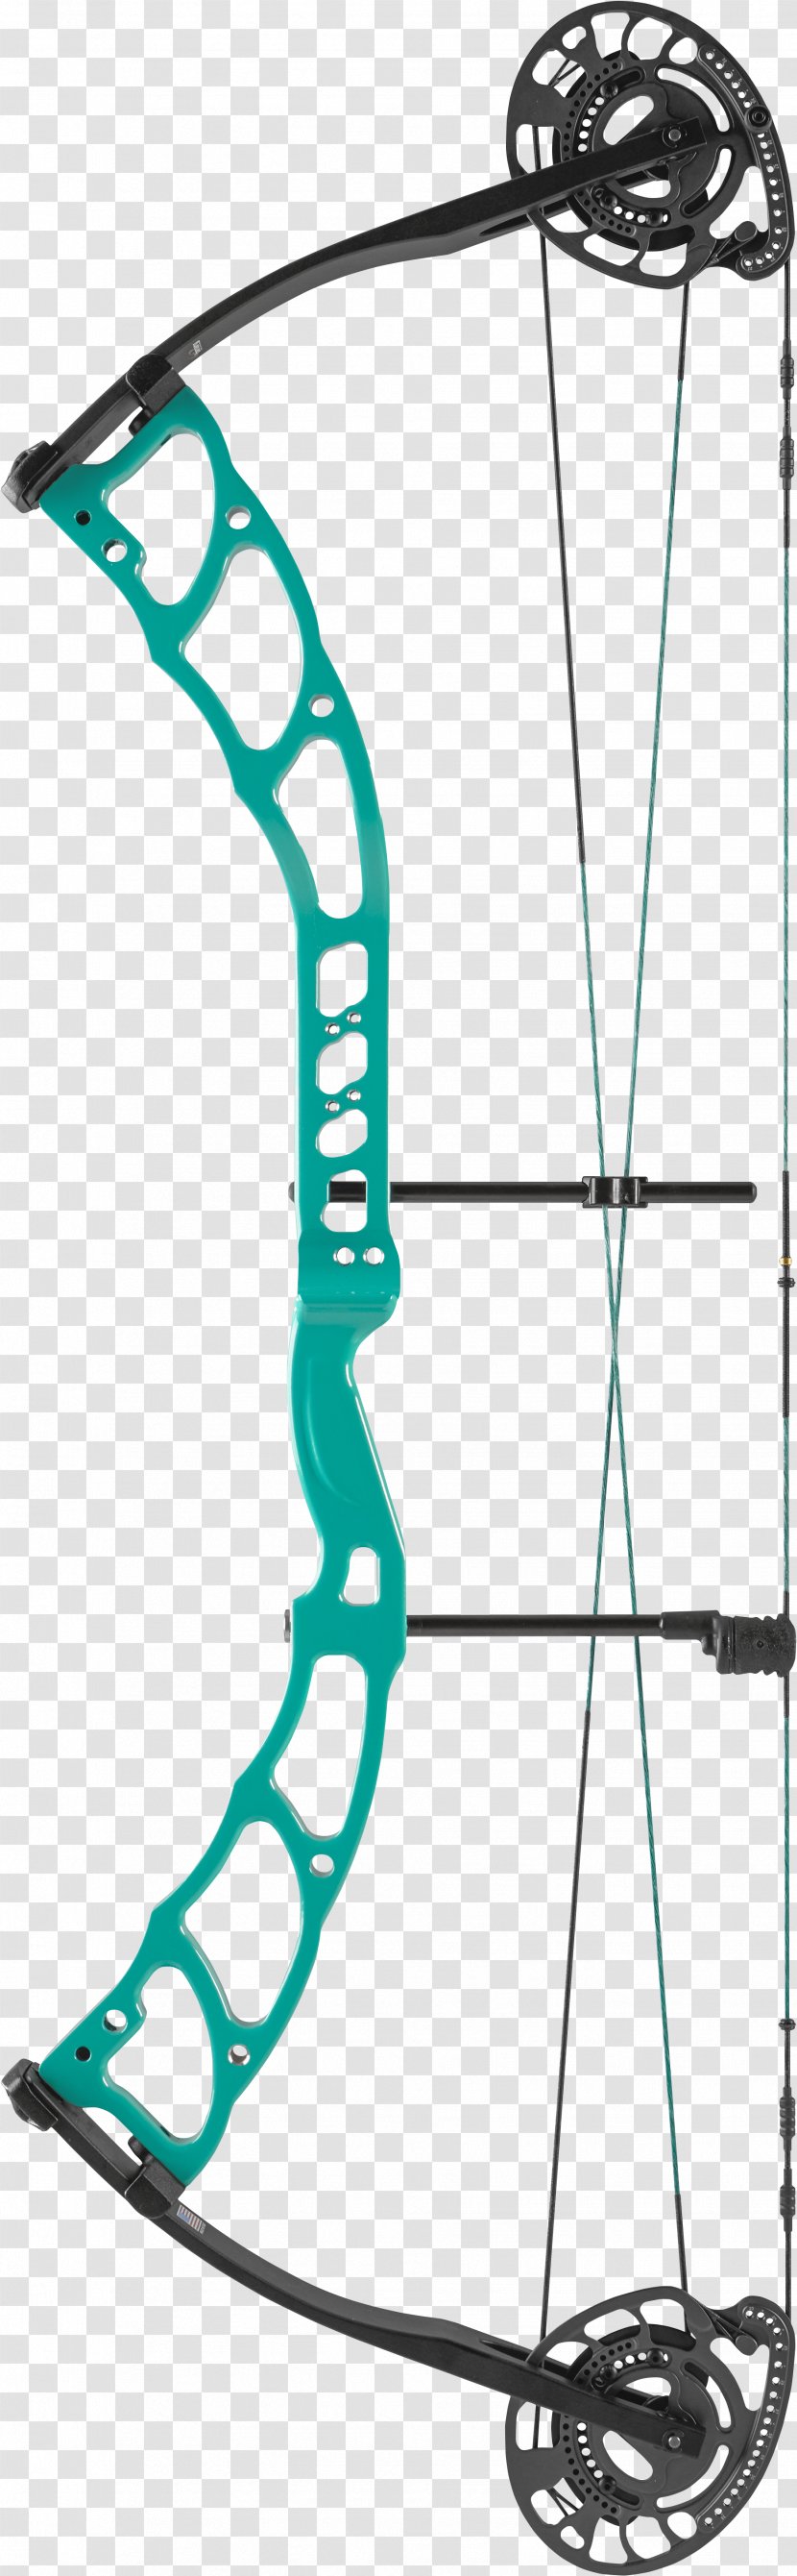 Archery Compound Bows Hunting Diamond Bow And Arrow - Recreation Transparent PNG